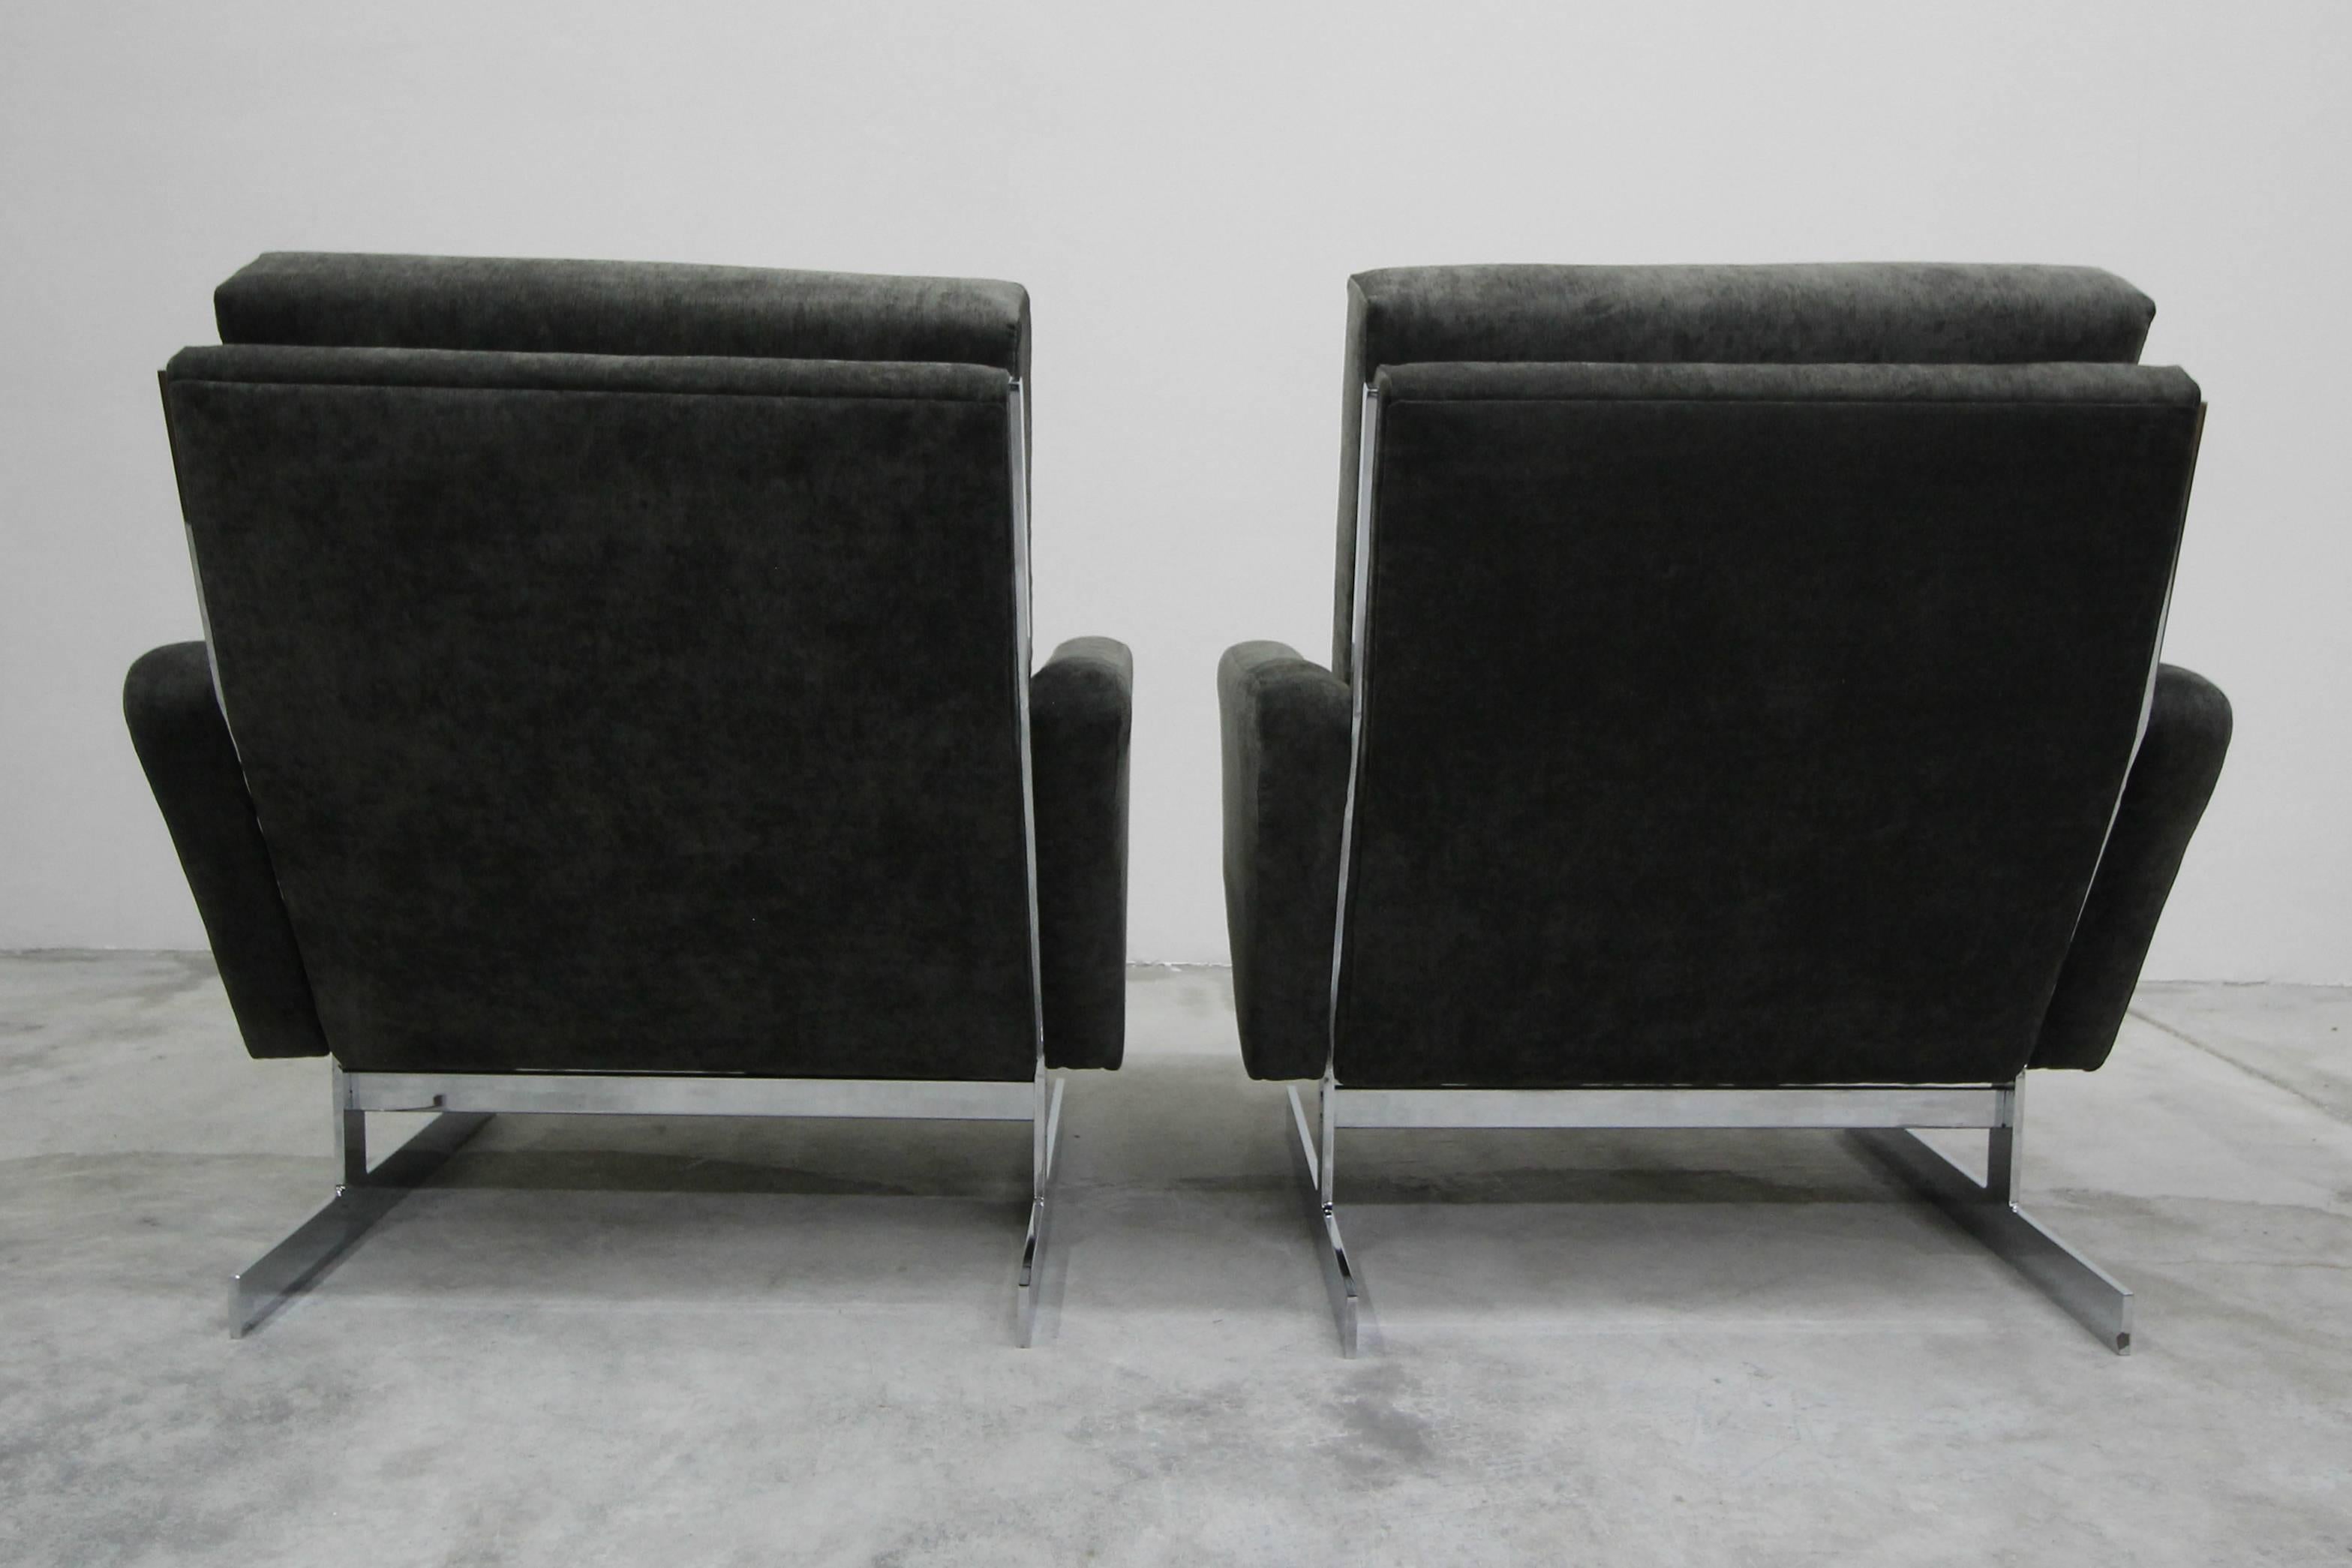 20th Century Pair of Midcentury Chrome Cantilever Lounge Chairs